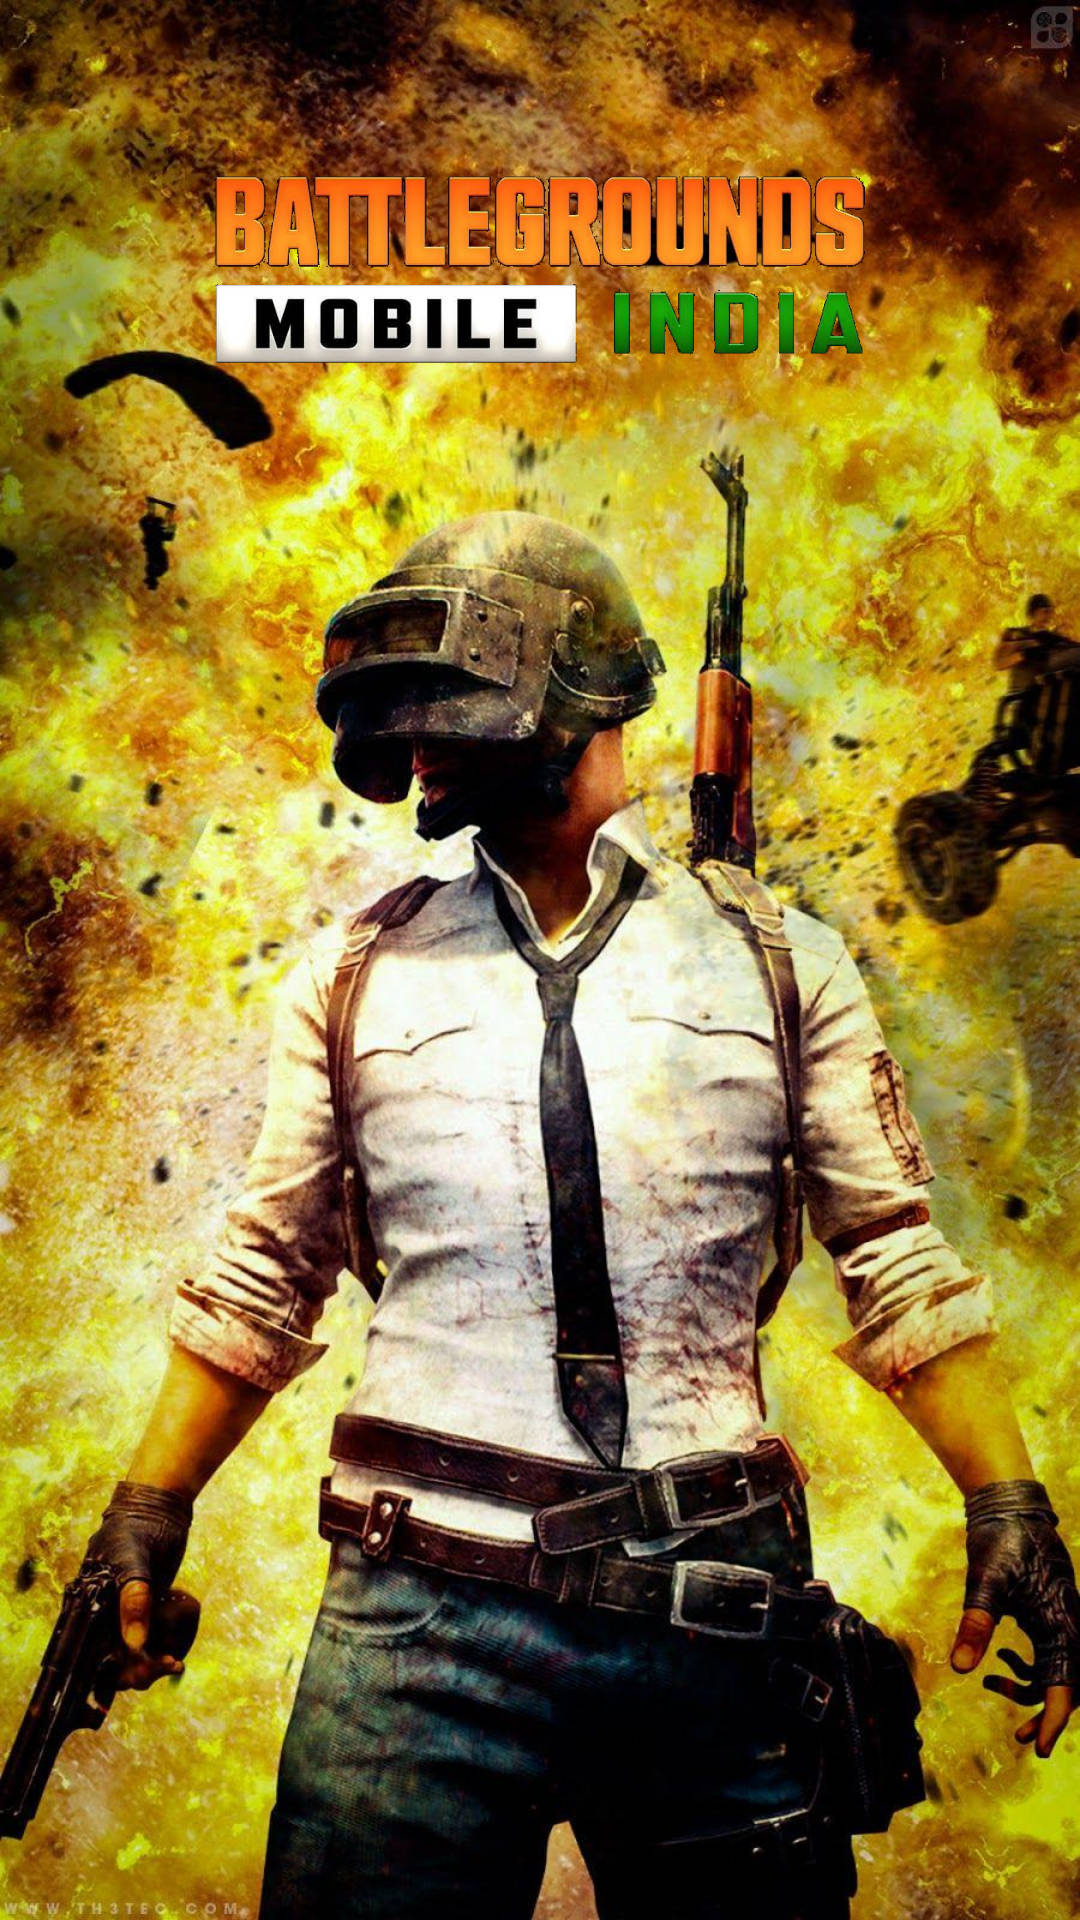 A Thrilling Game Of Strategy And Survival In Battlegrounds Mobile India. Background